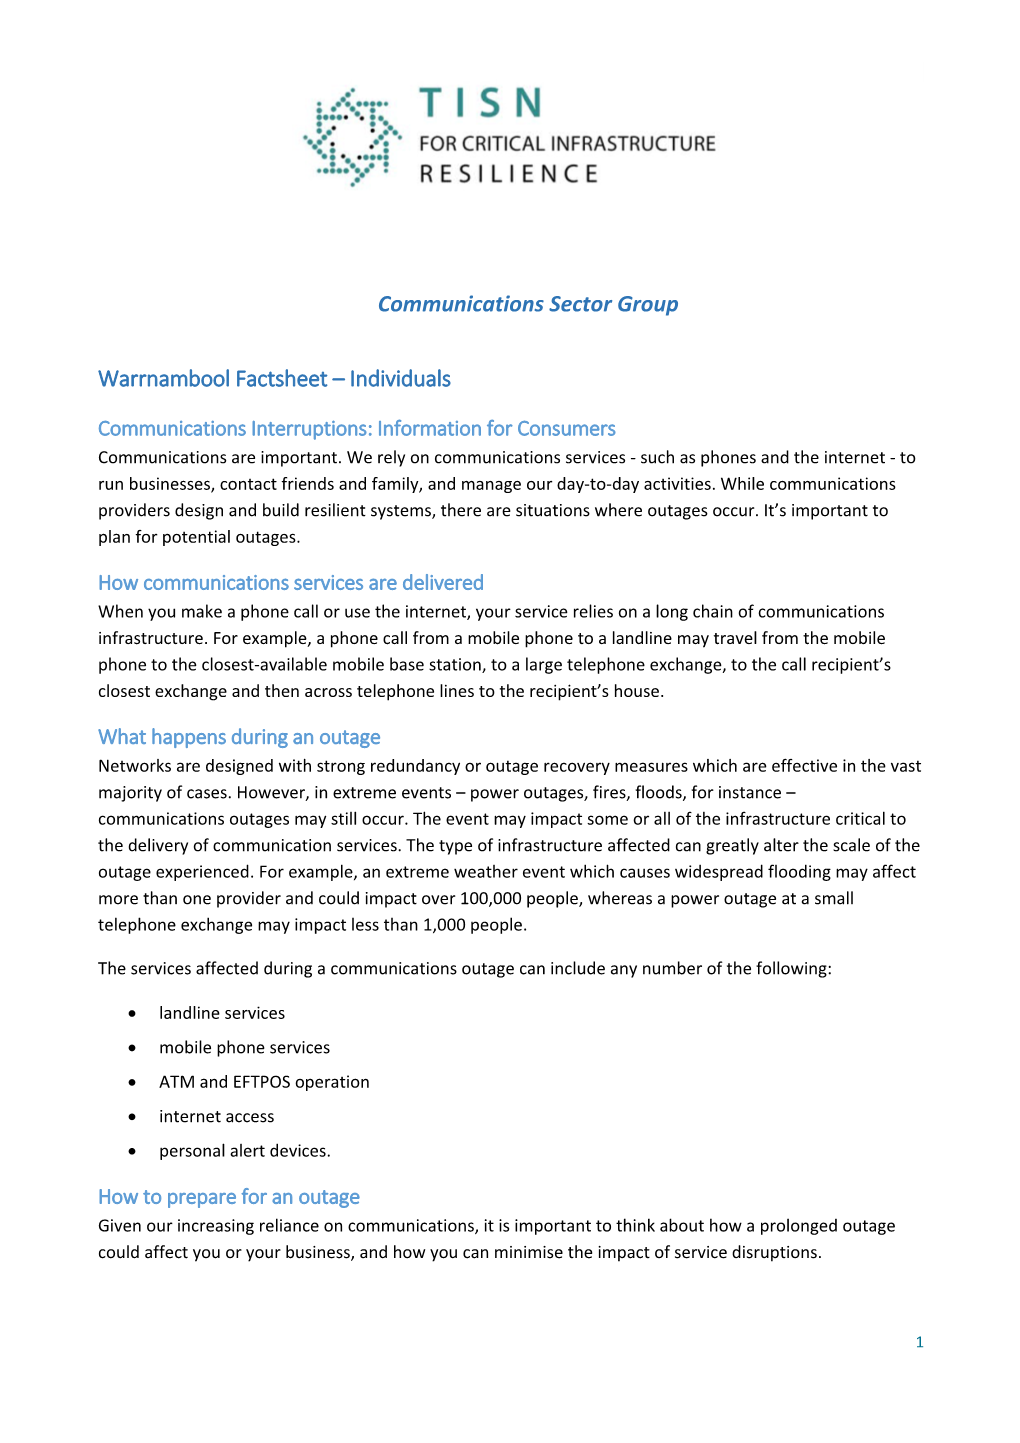 Communications Outages - Continuity Guidance for Consumers